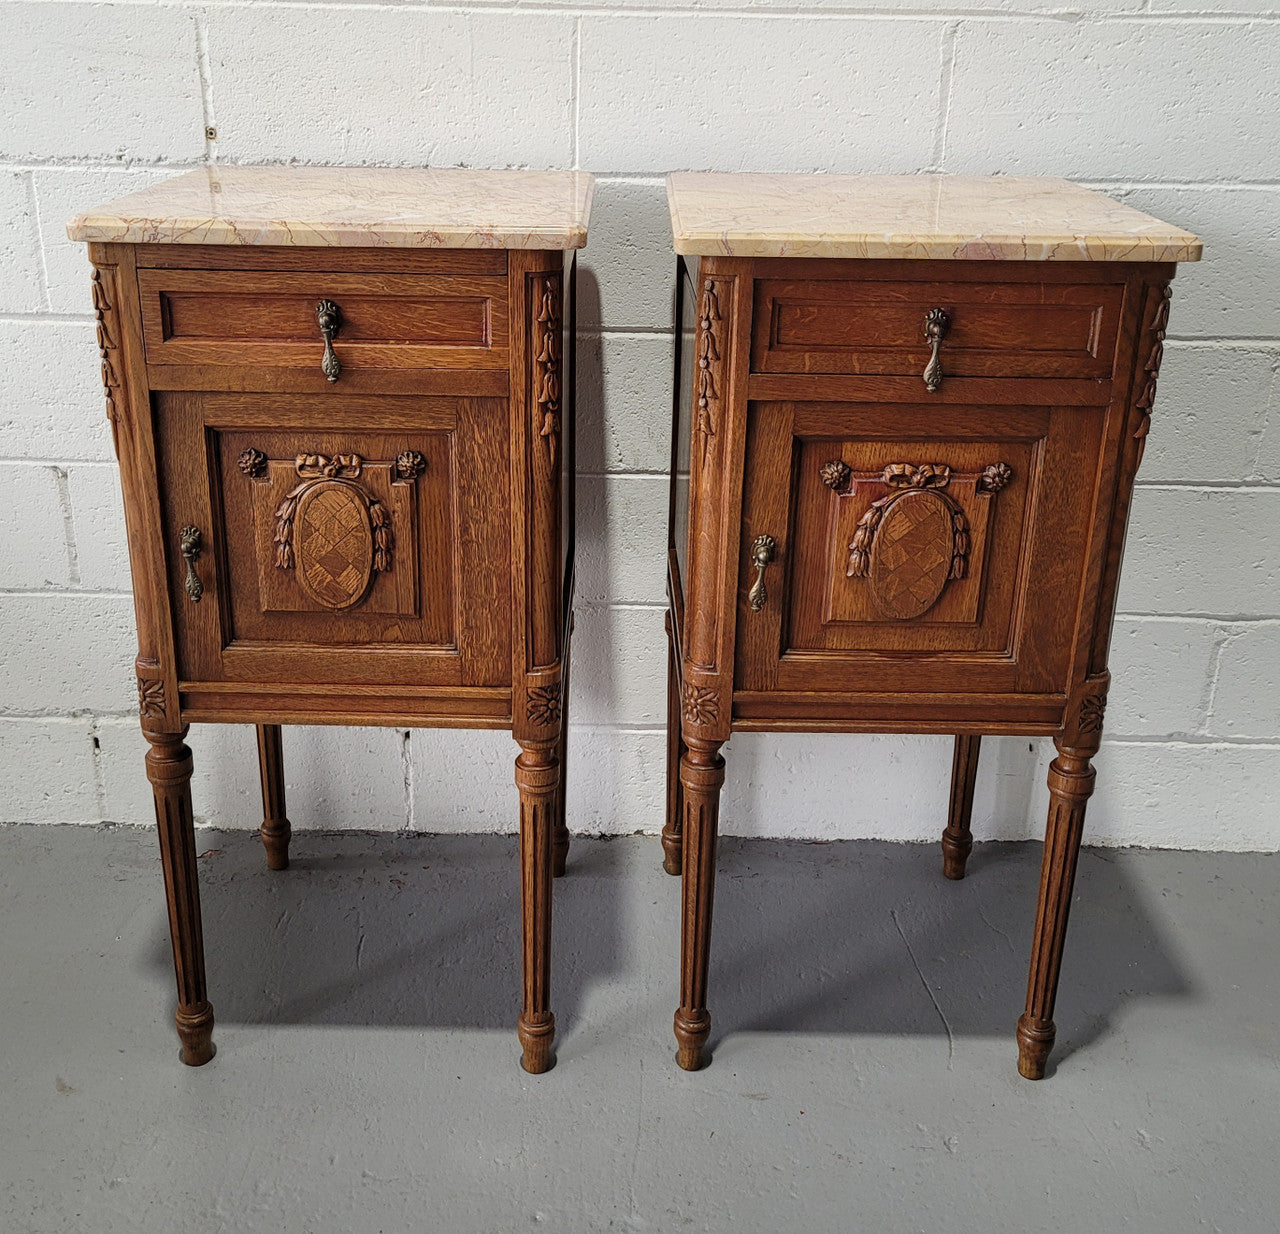 Pair of Louis XV French Oak and marble top bedside cabinets. They have beautiful detailed carving and stunning color marble top. They are in very good original detailed condition.